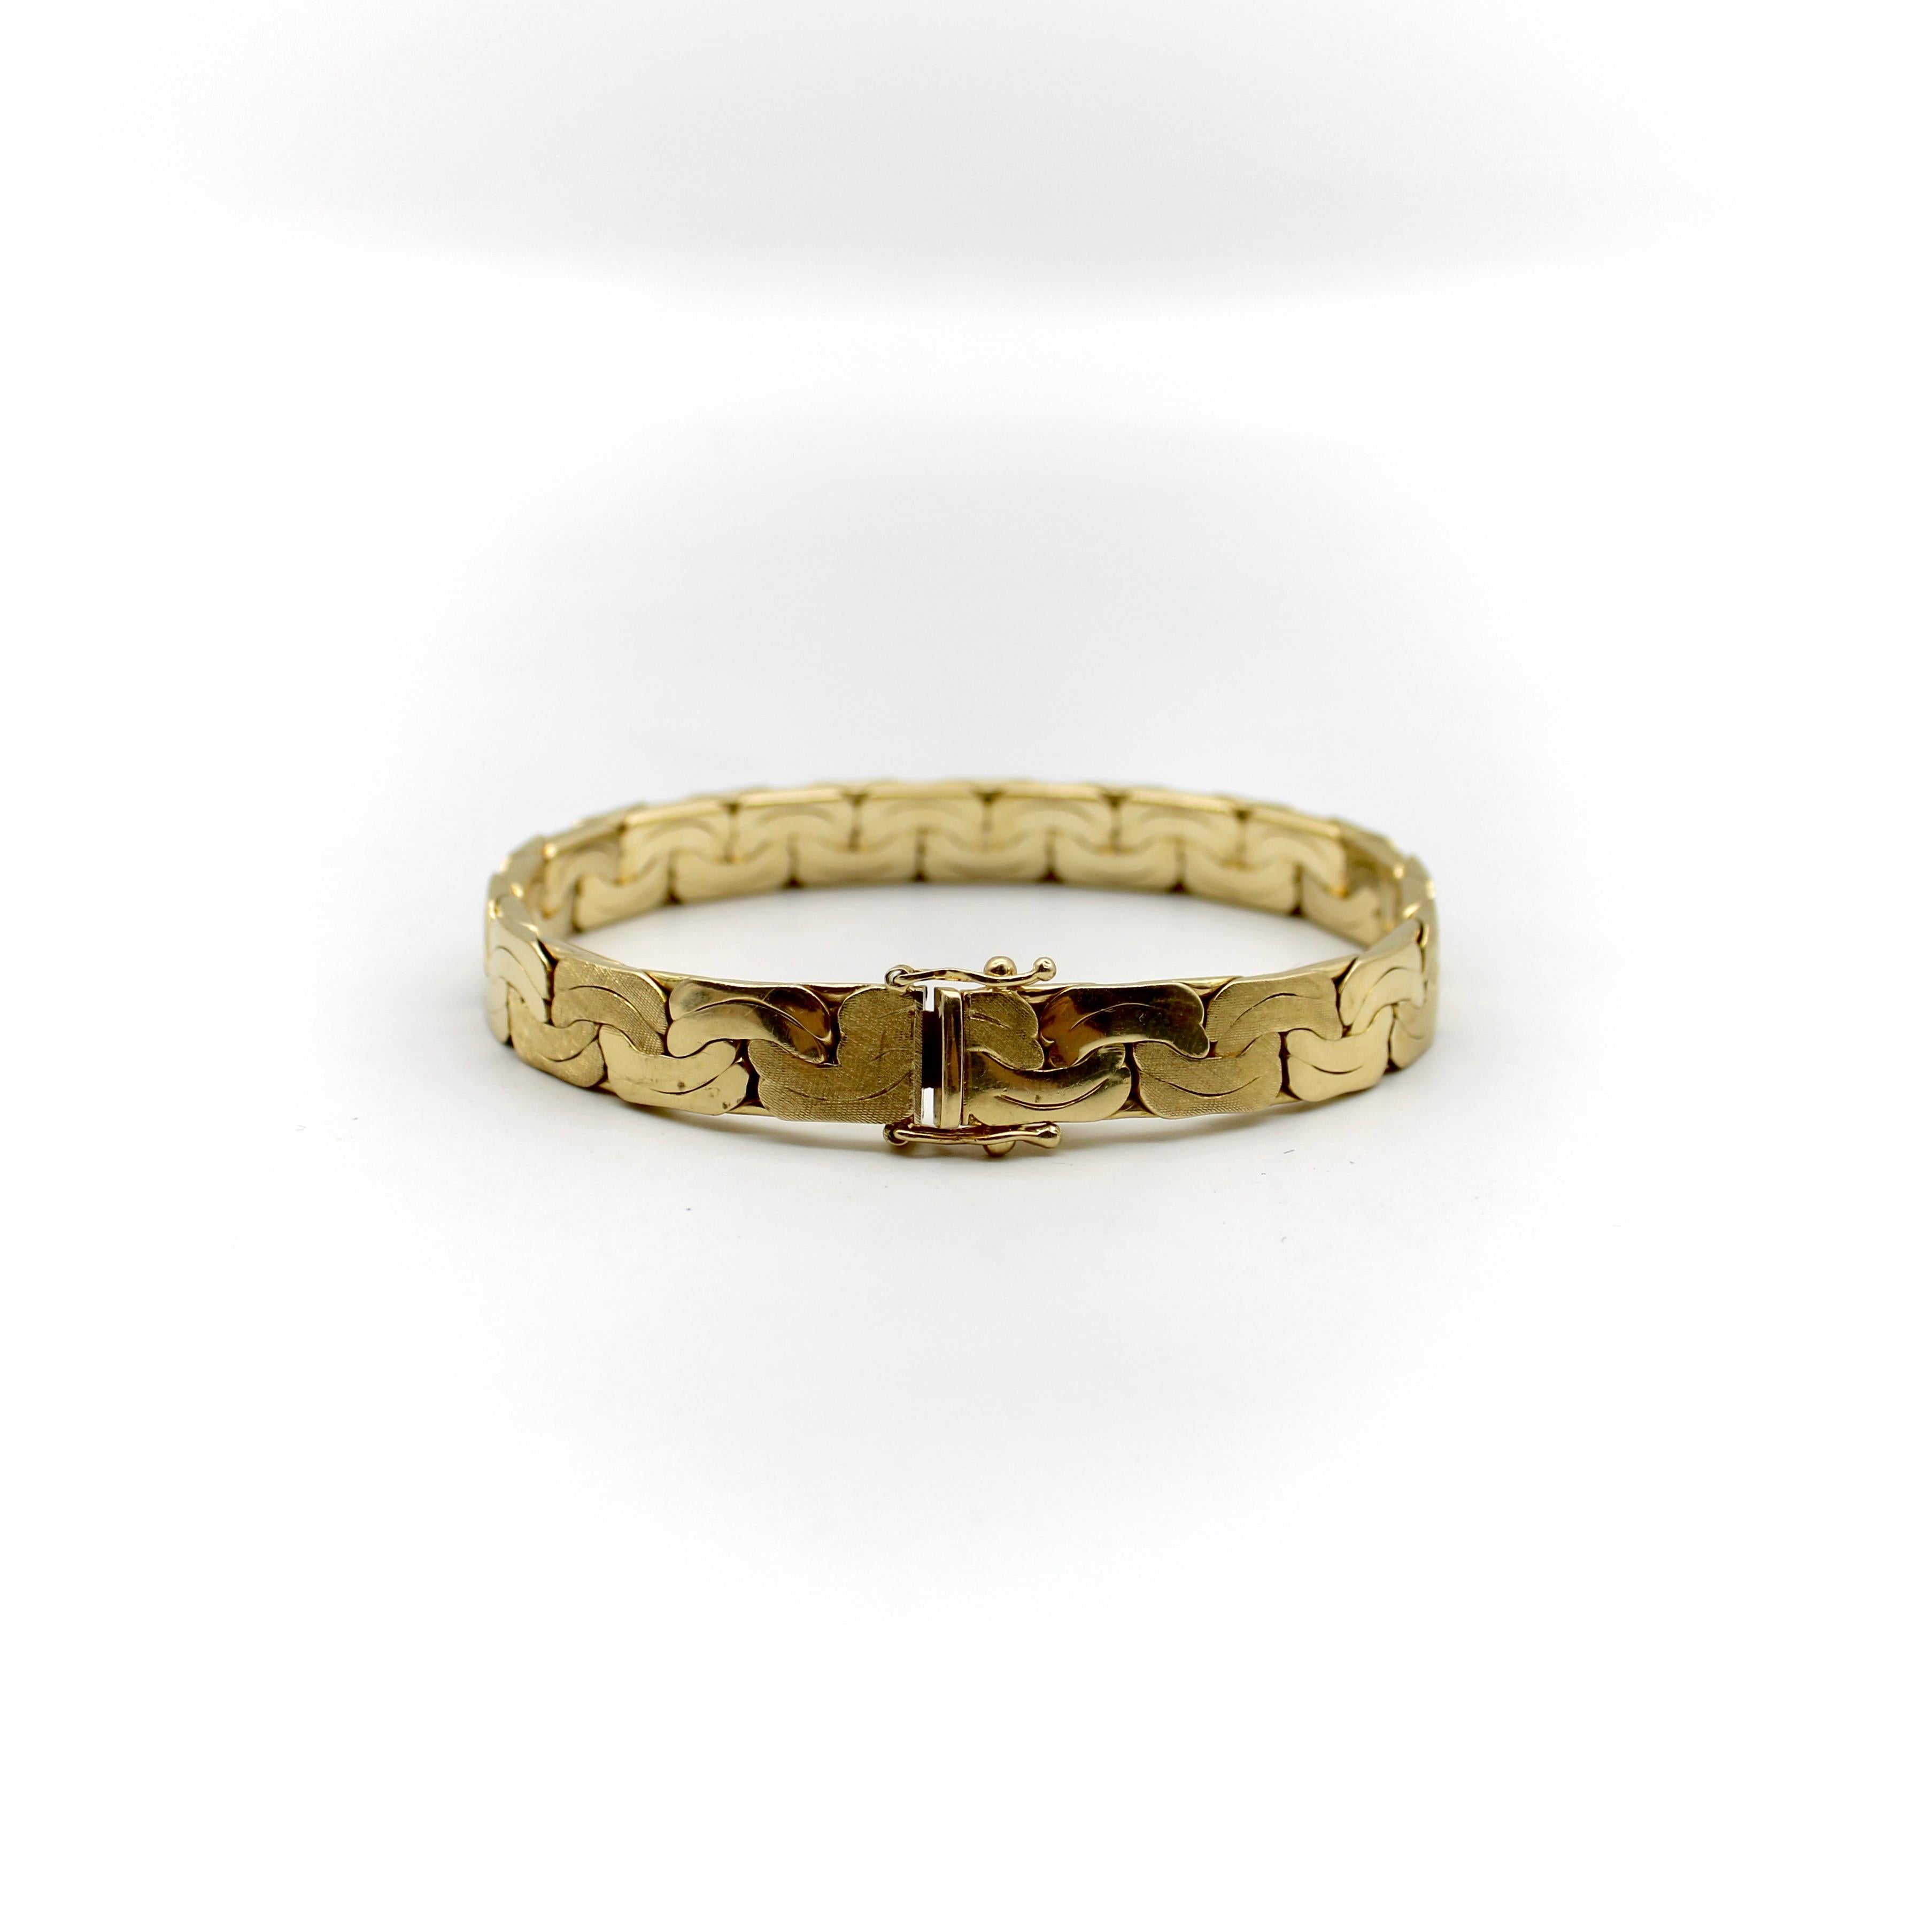 Circa the 1980’s, this 14k gold vintage bracelet has a geometric design and solid, fluid form. The link appears squashed, with a curved line down its center, and an alternating Florentine finish. It is a double link, flattened on both sides, so that